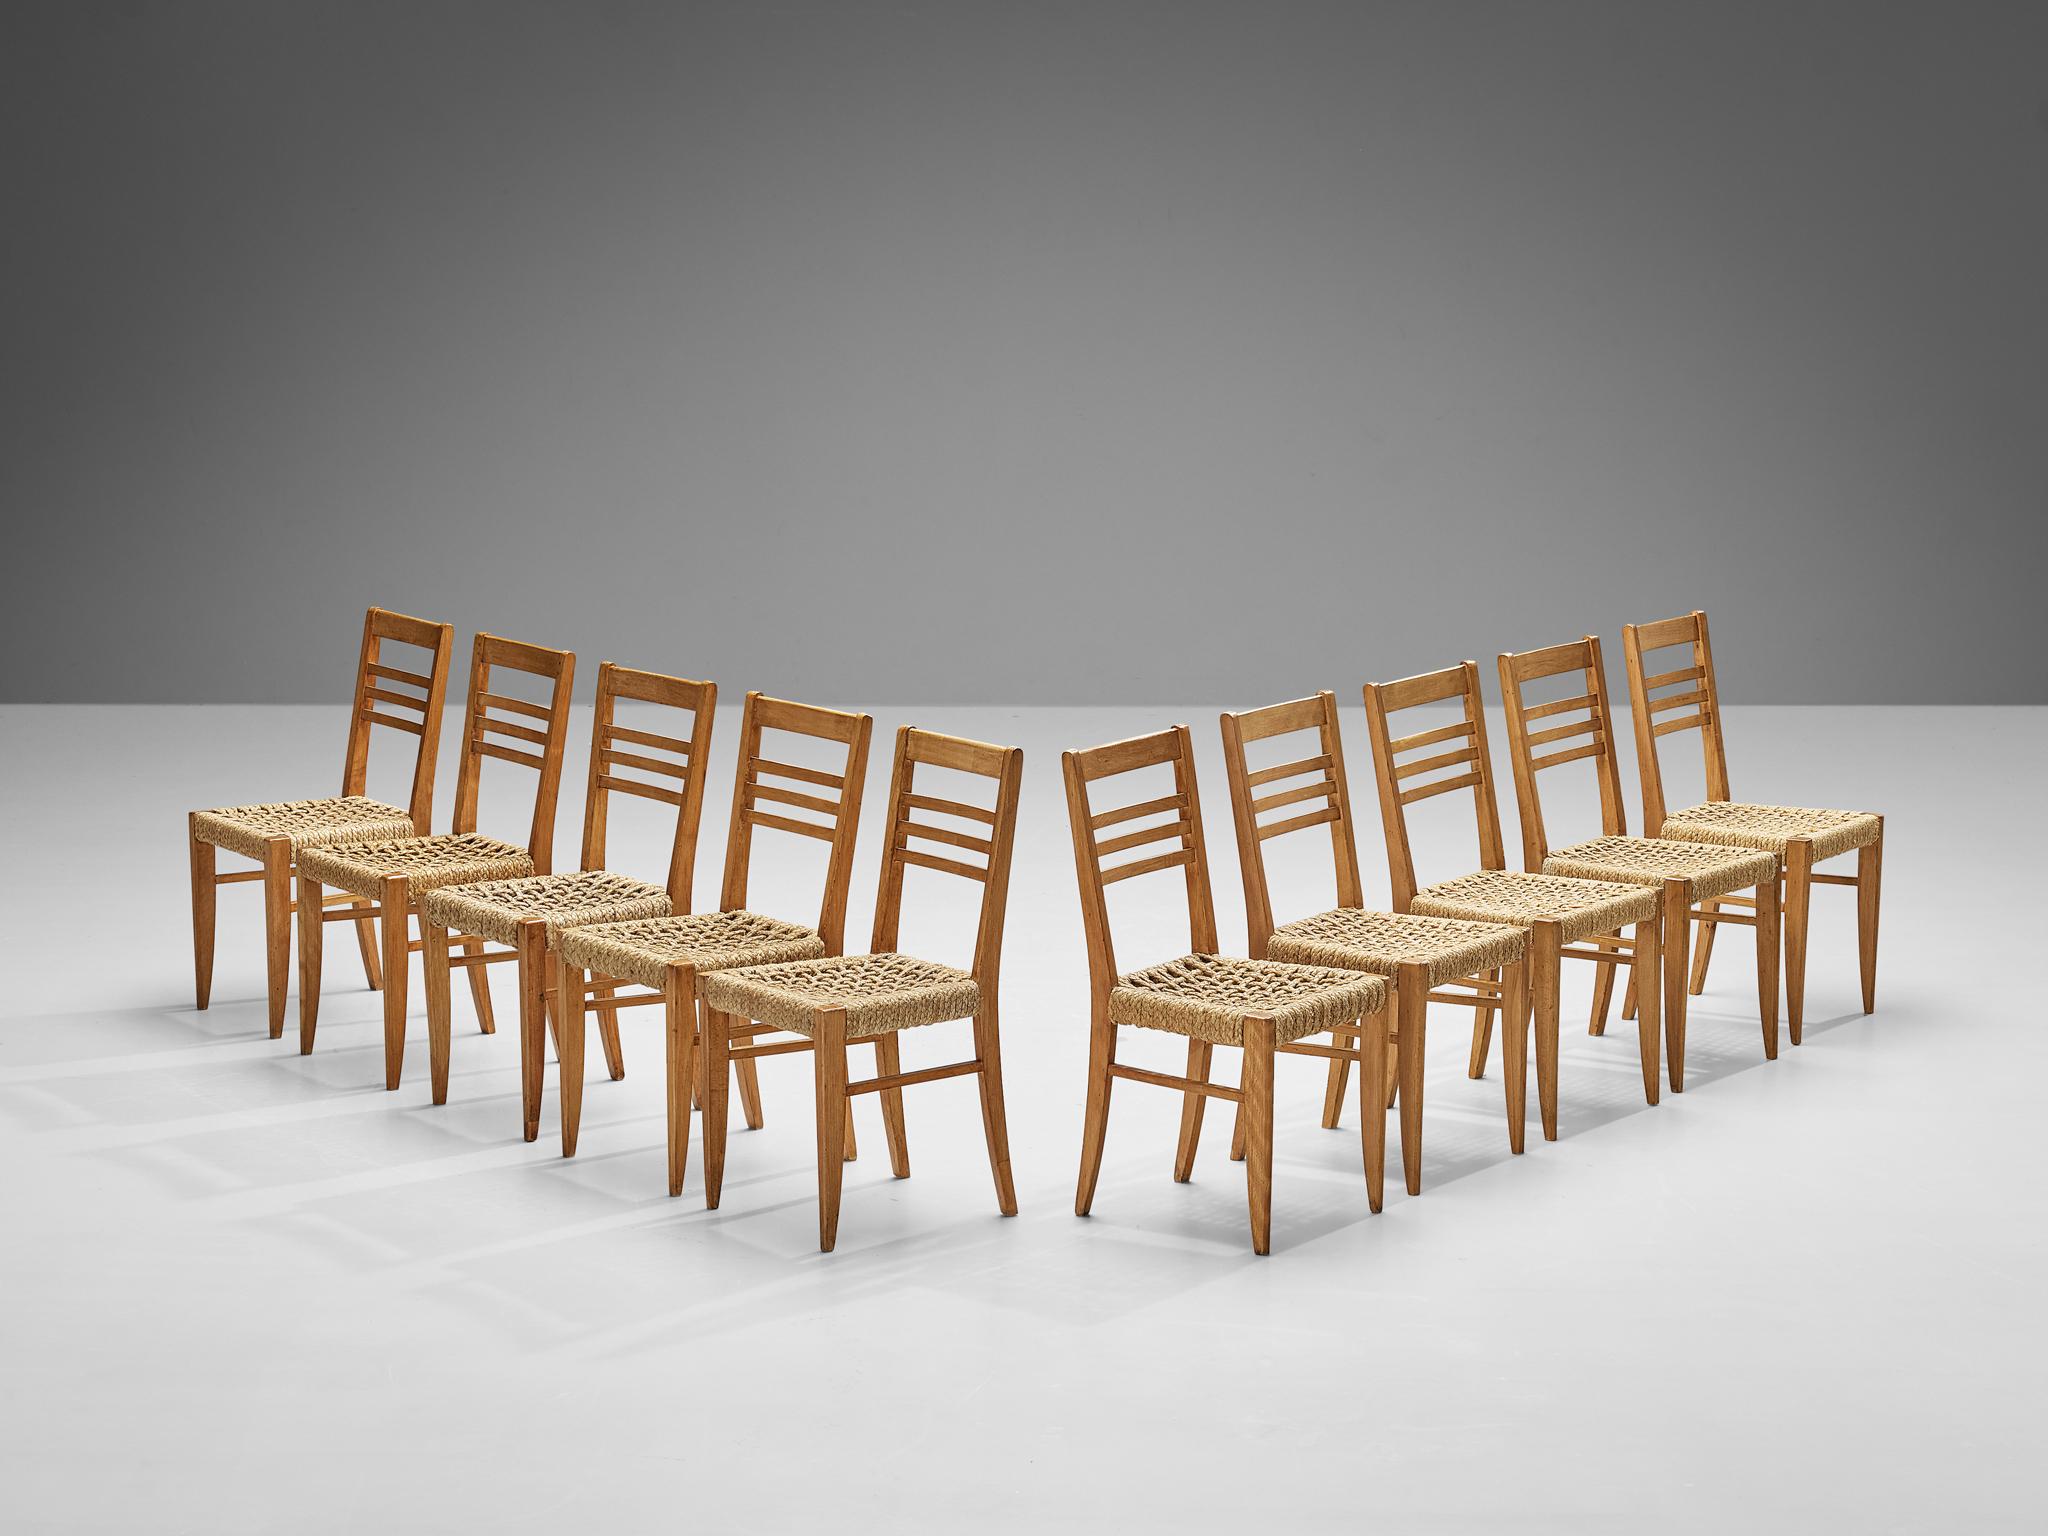 Adrien Audoux and Frida Minet for Vibo, set of ten armchairs, beech, rope hemp, France, late 1940s 

Set of ten naturalistic dining chairs designed by Adrien Audoux and Frida Minet. The seats are made of woven hemp from the abaca plant which is